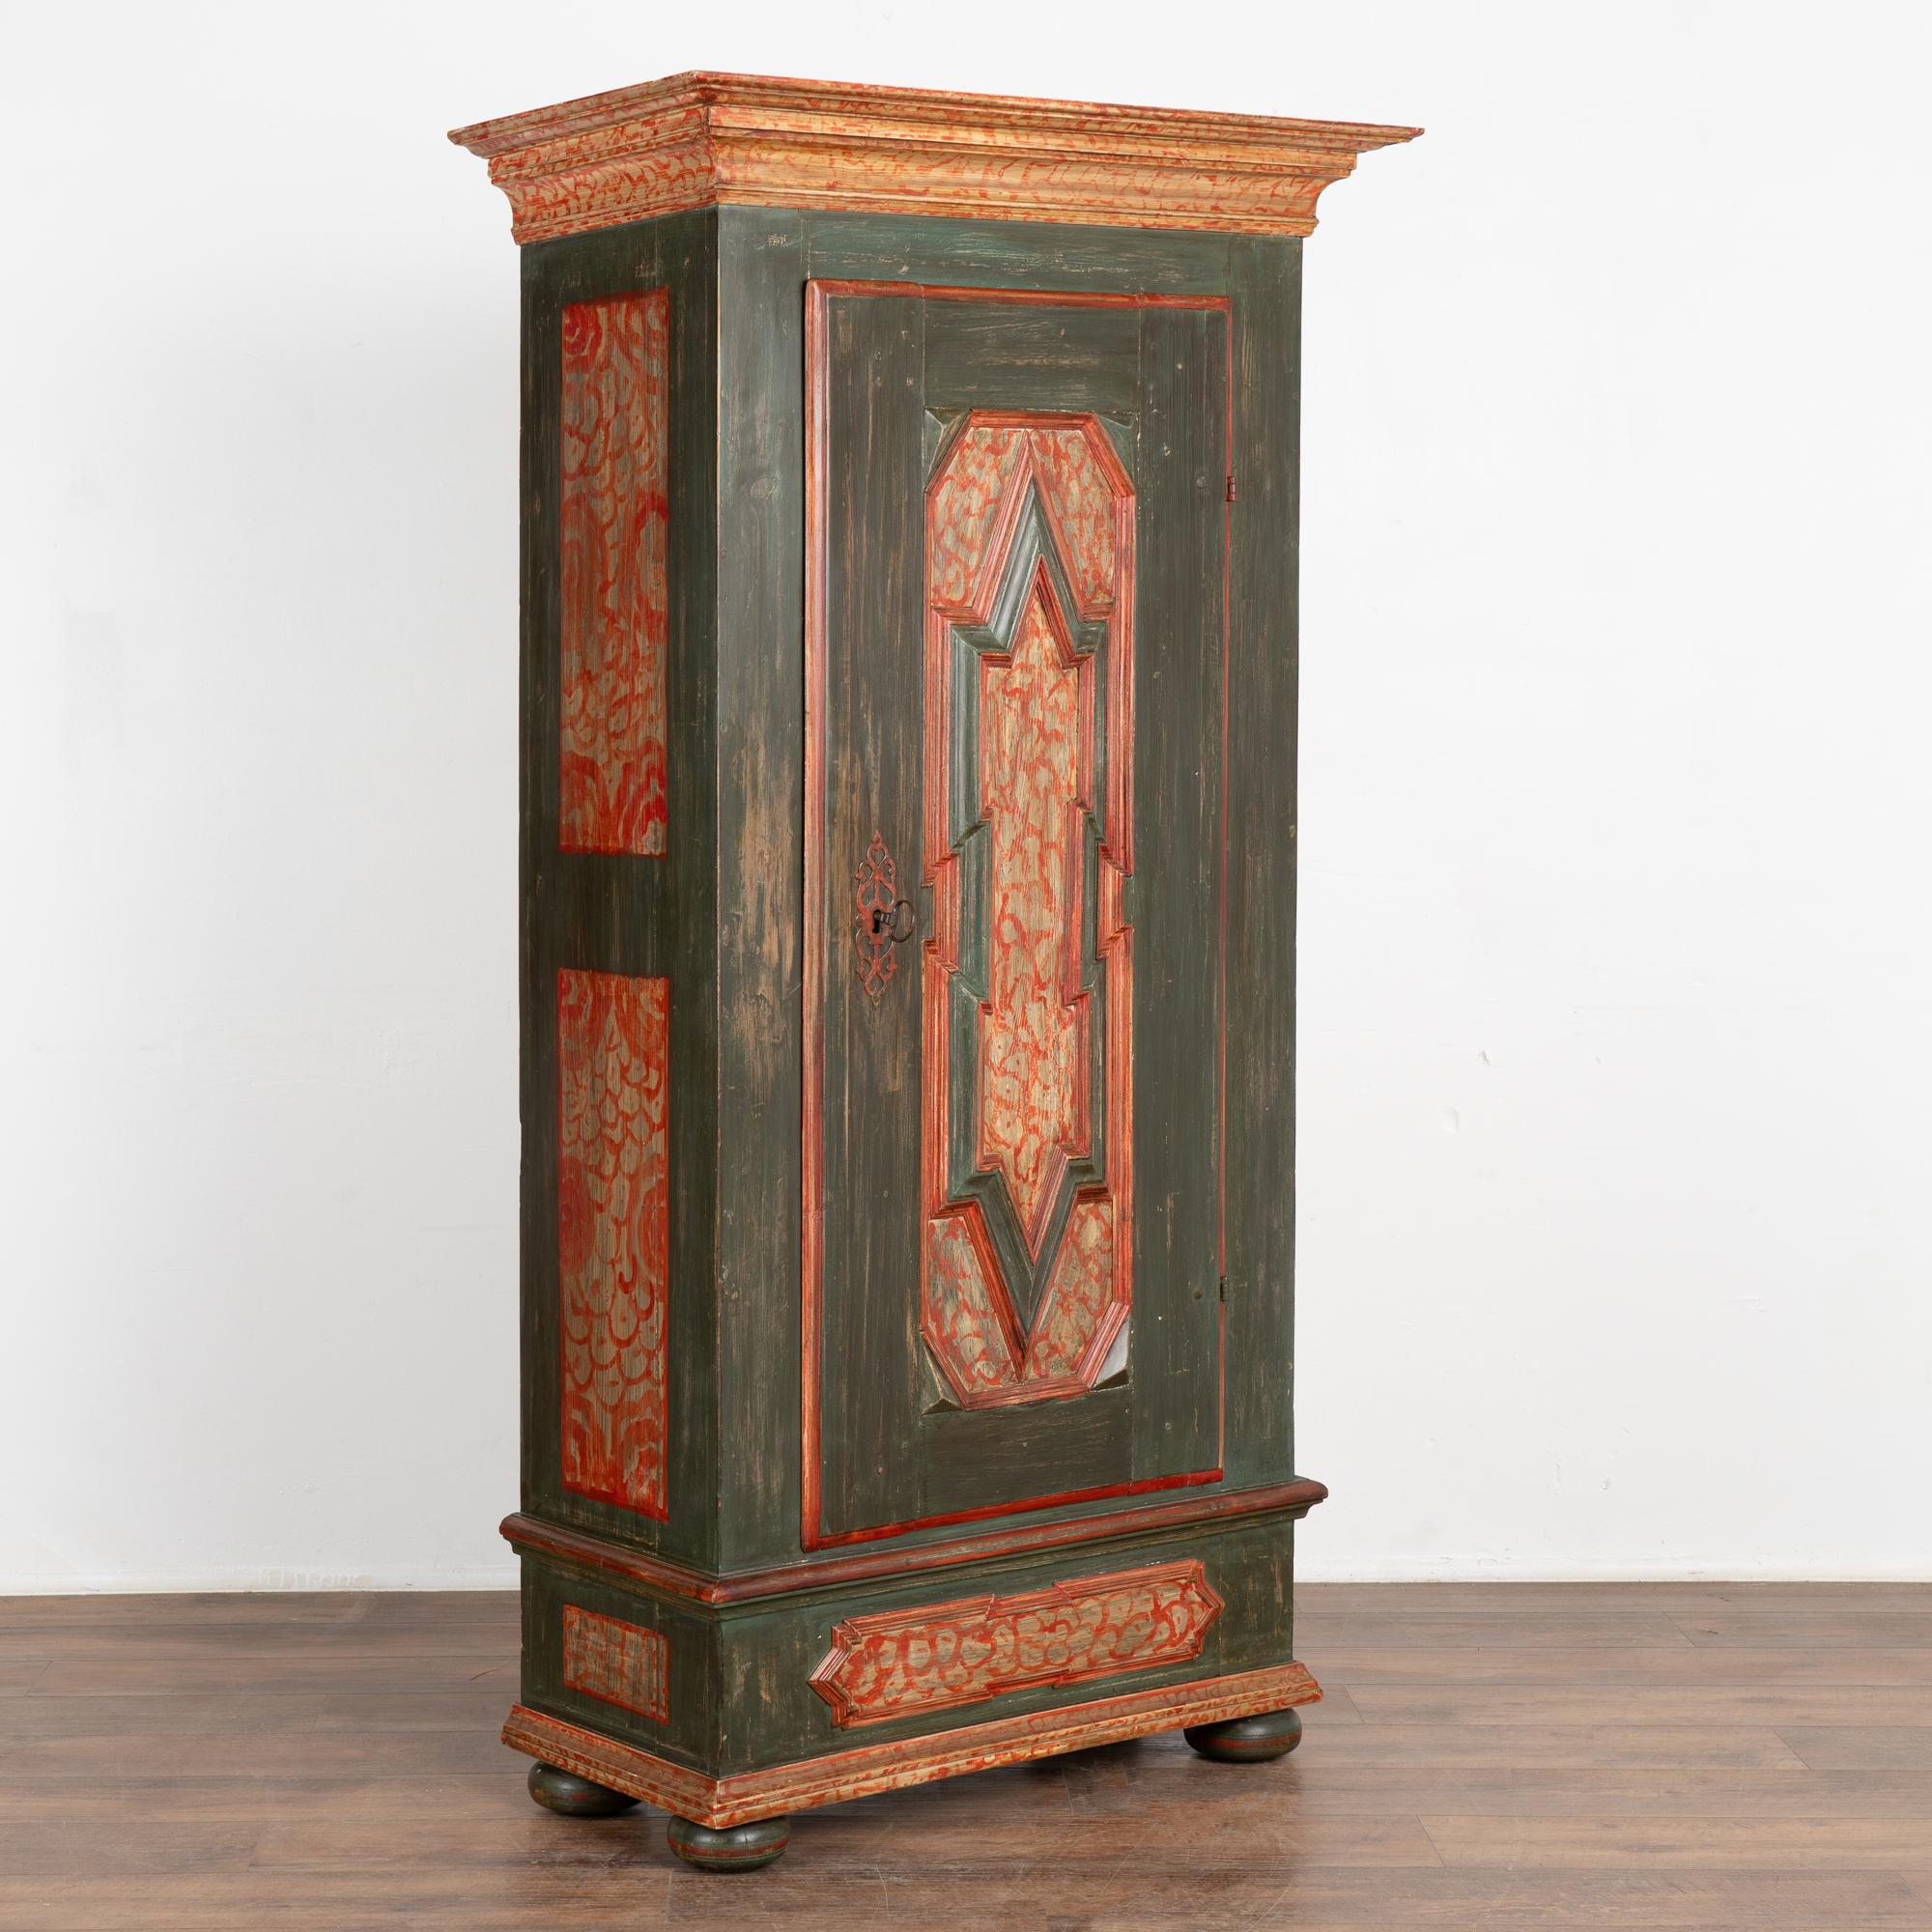 This charming single door armoire is in excellent original condition. The case is painted a dark green with red folk art accents seen in the painted panels, crown and base. 
The original lock mechanism still works, note the interior photo of the